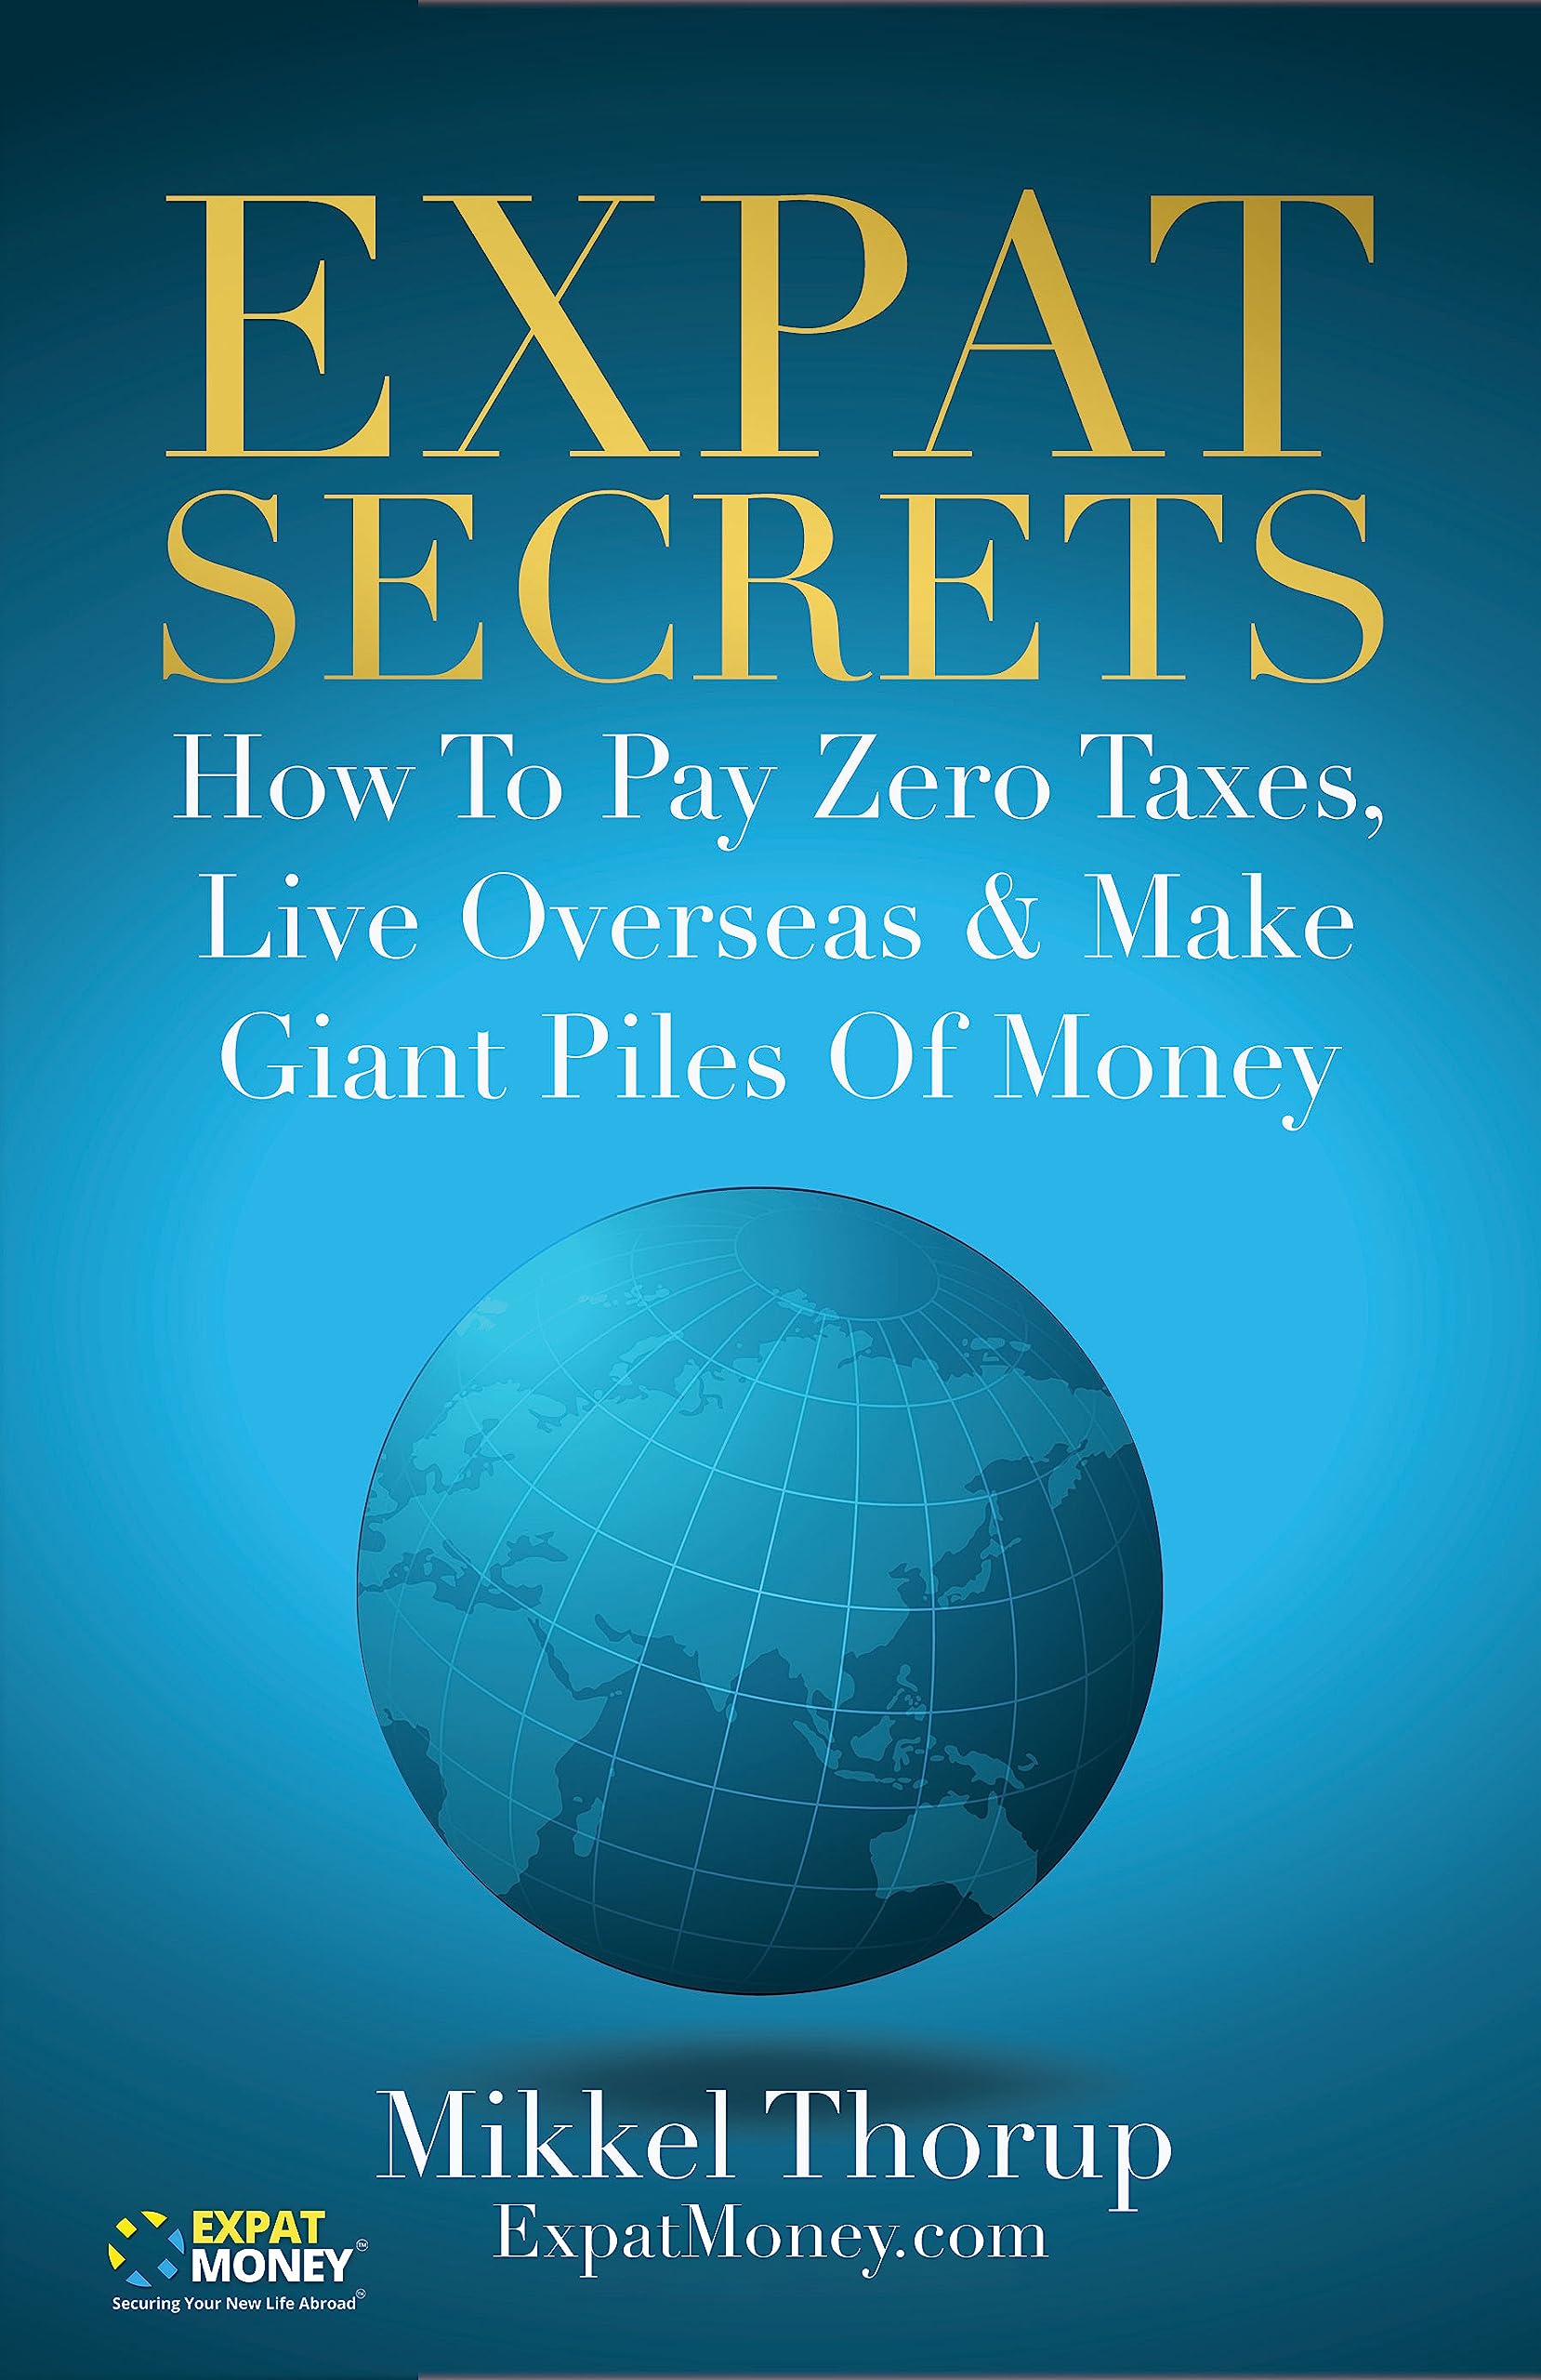 Book Cover Expat Secrets: How To Pay Zero Taxes, Live Overseas & Make Giant Piles of Money